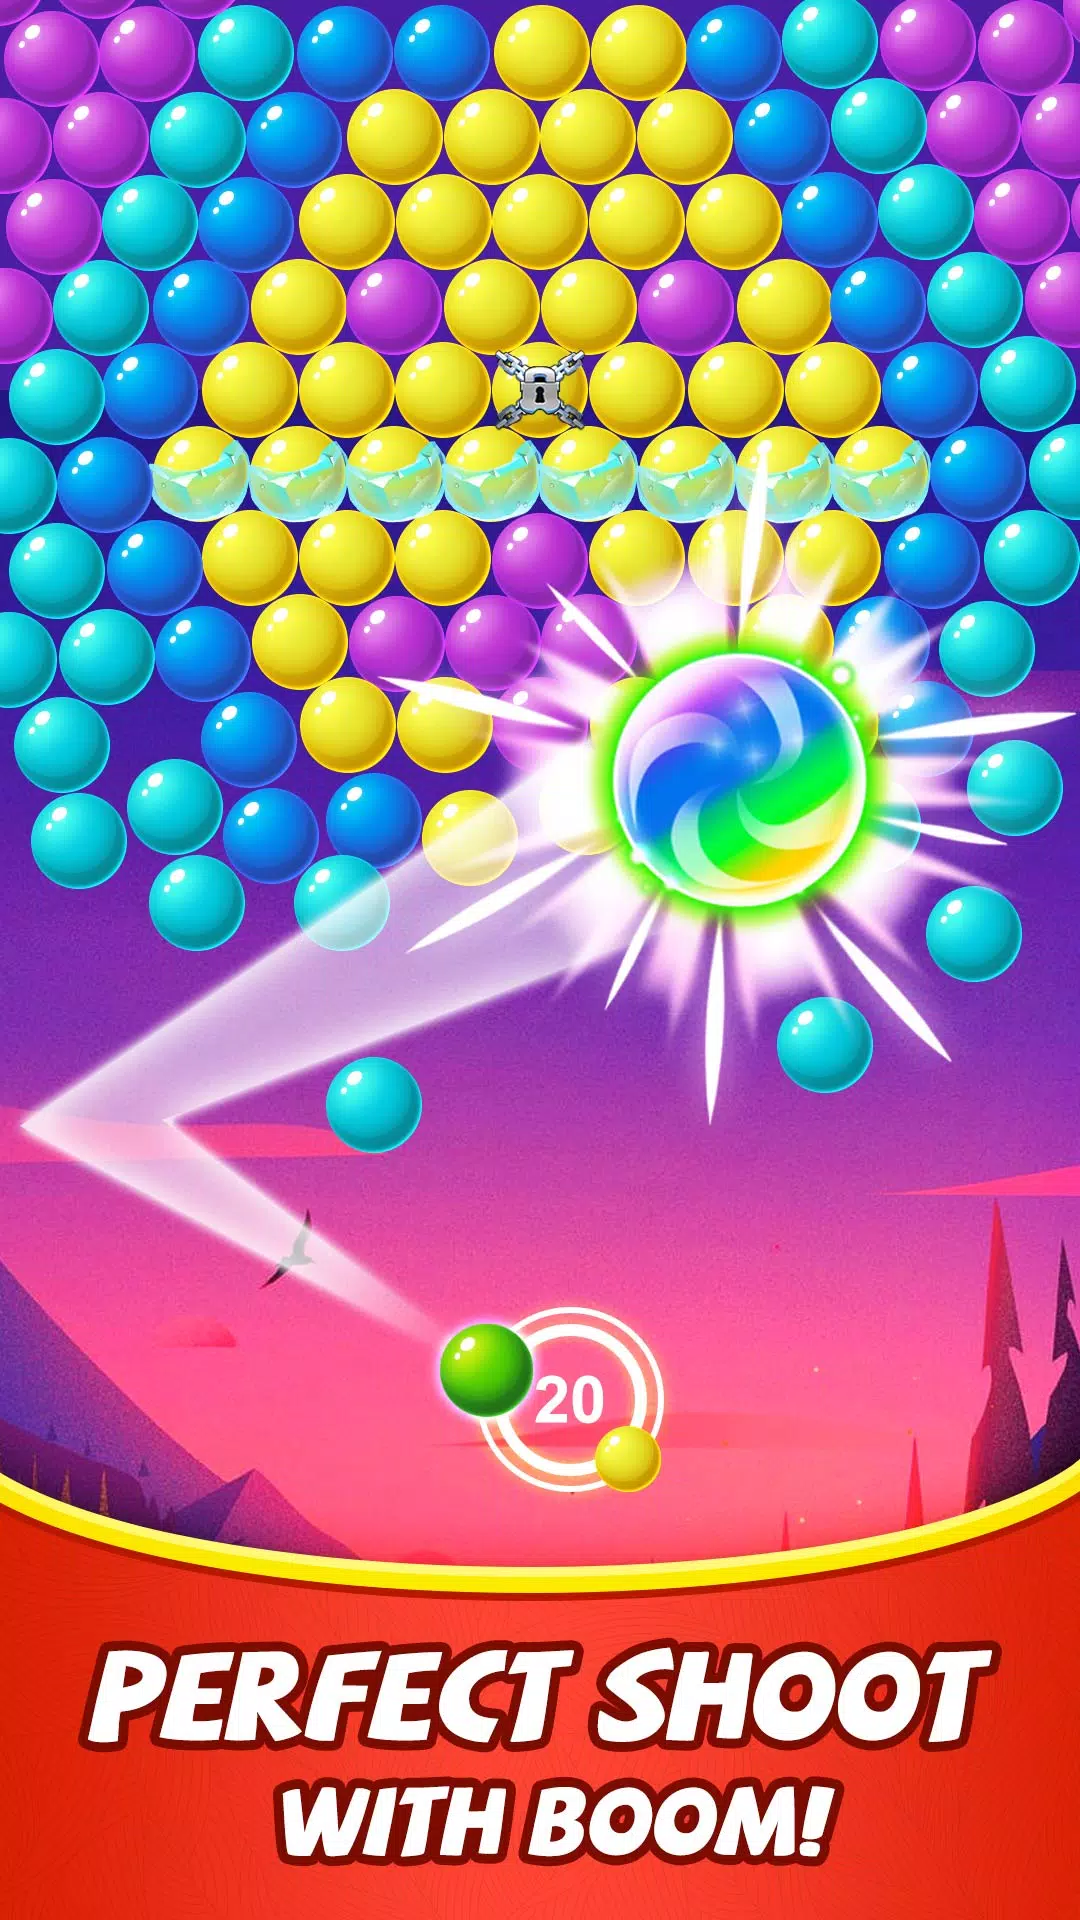 Bubble Shooter Challenge - Skill games 